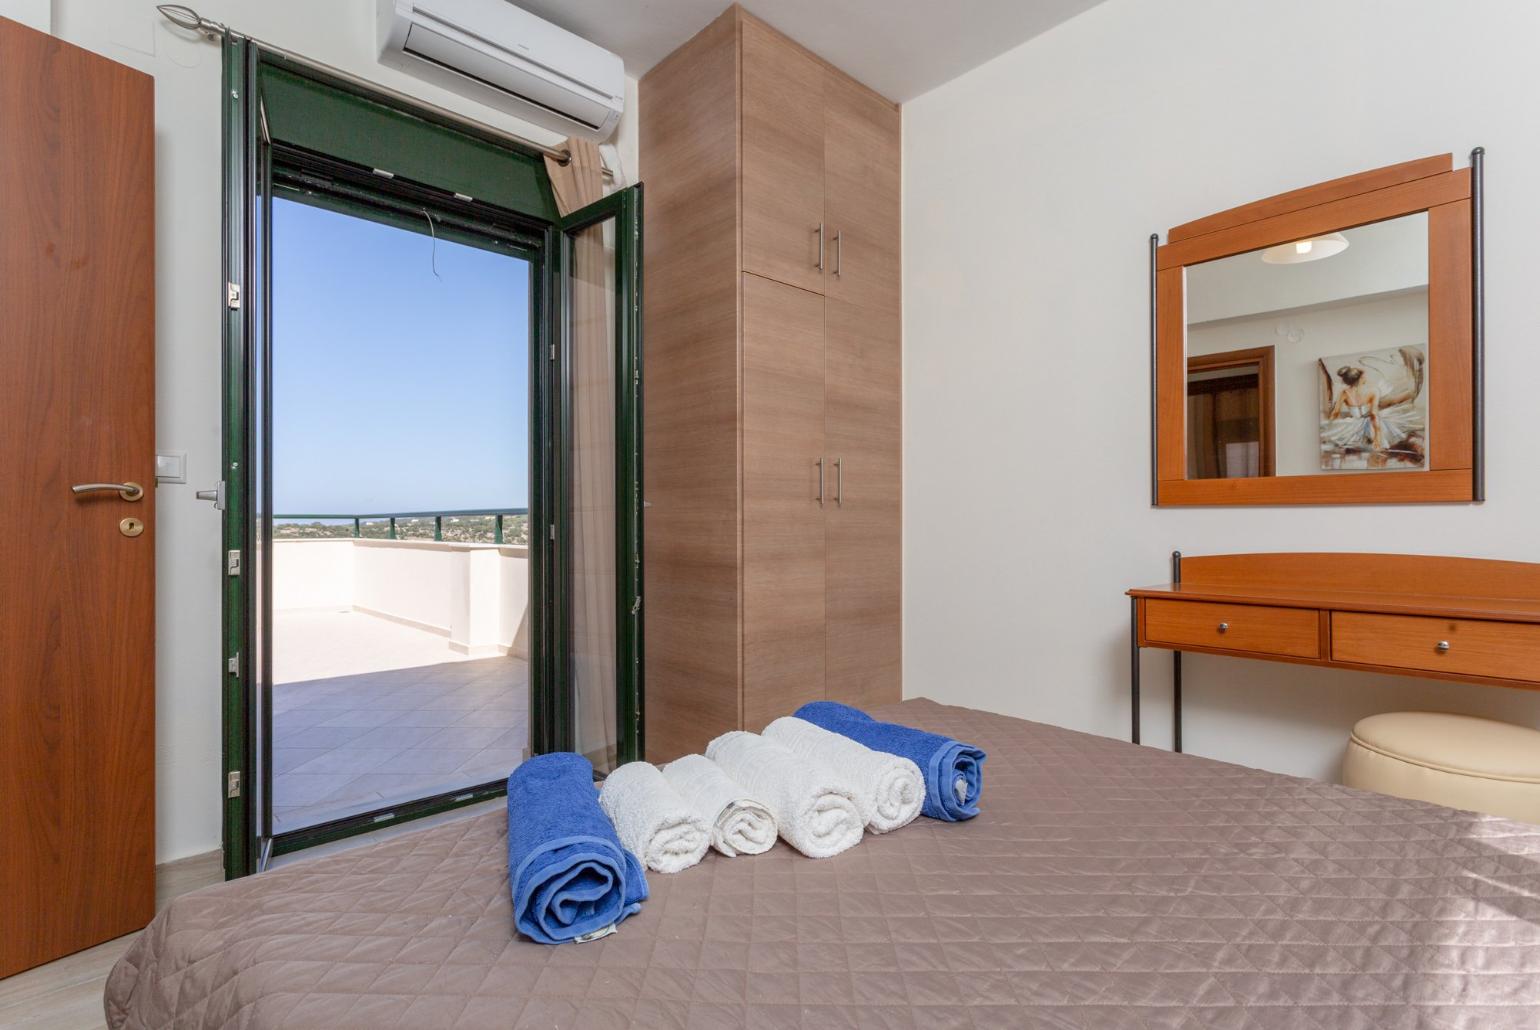 Double bedroom with A/C and balcony access